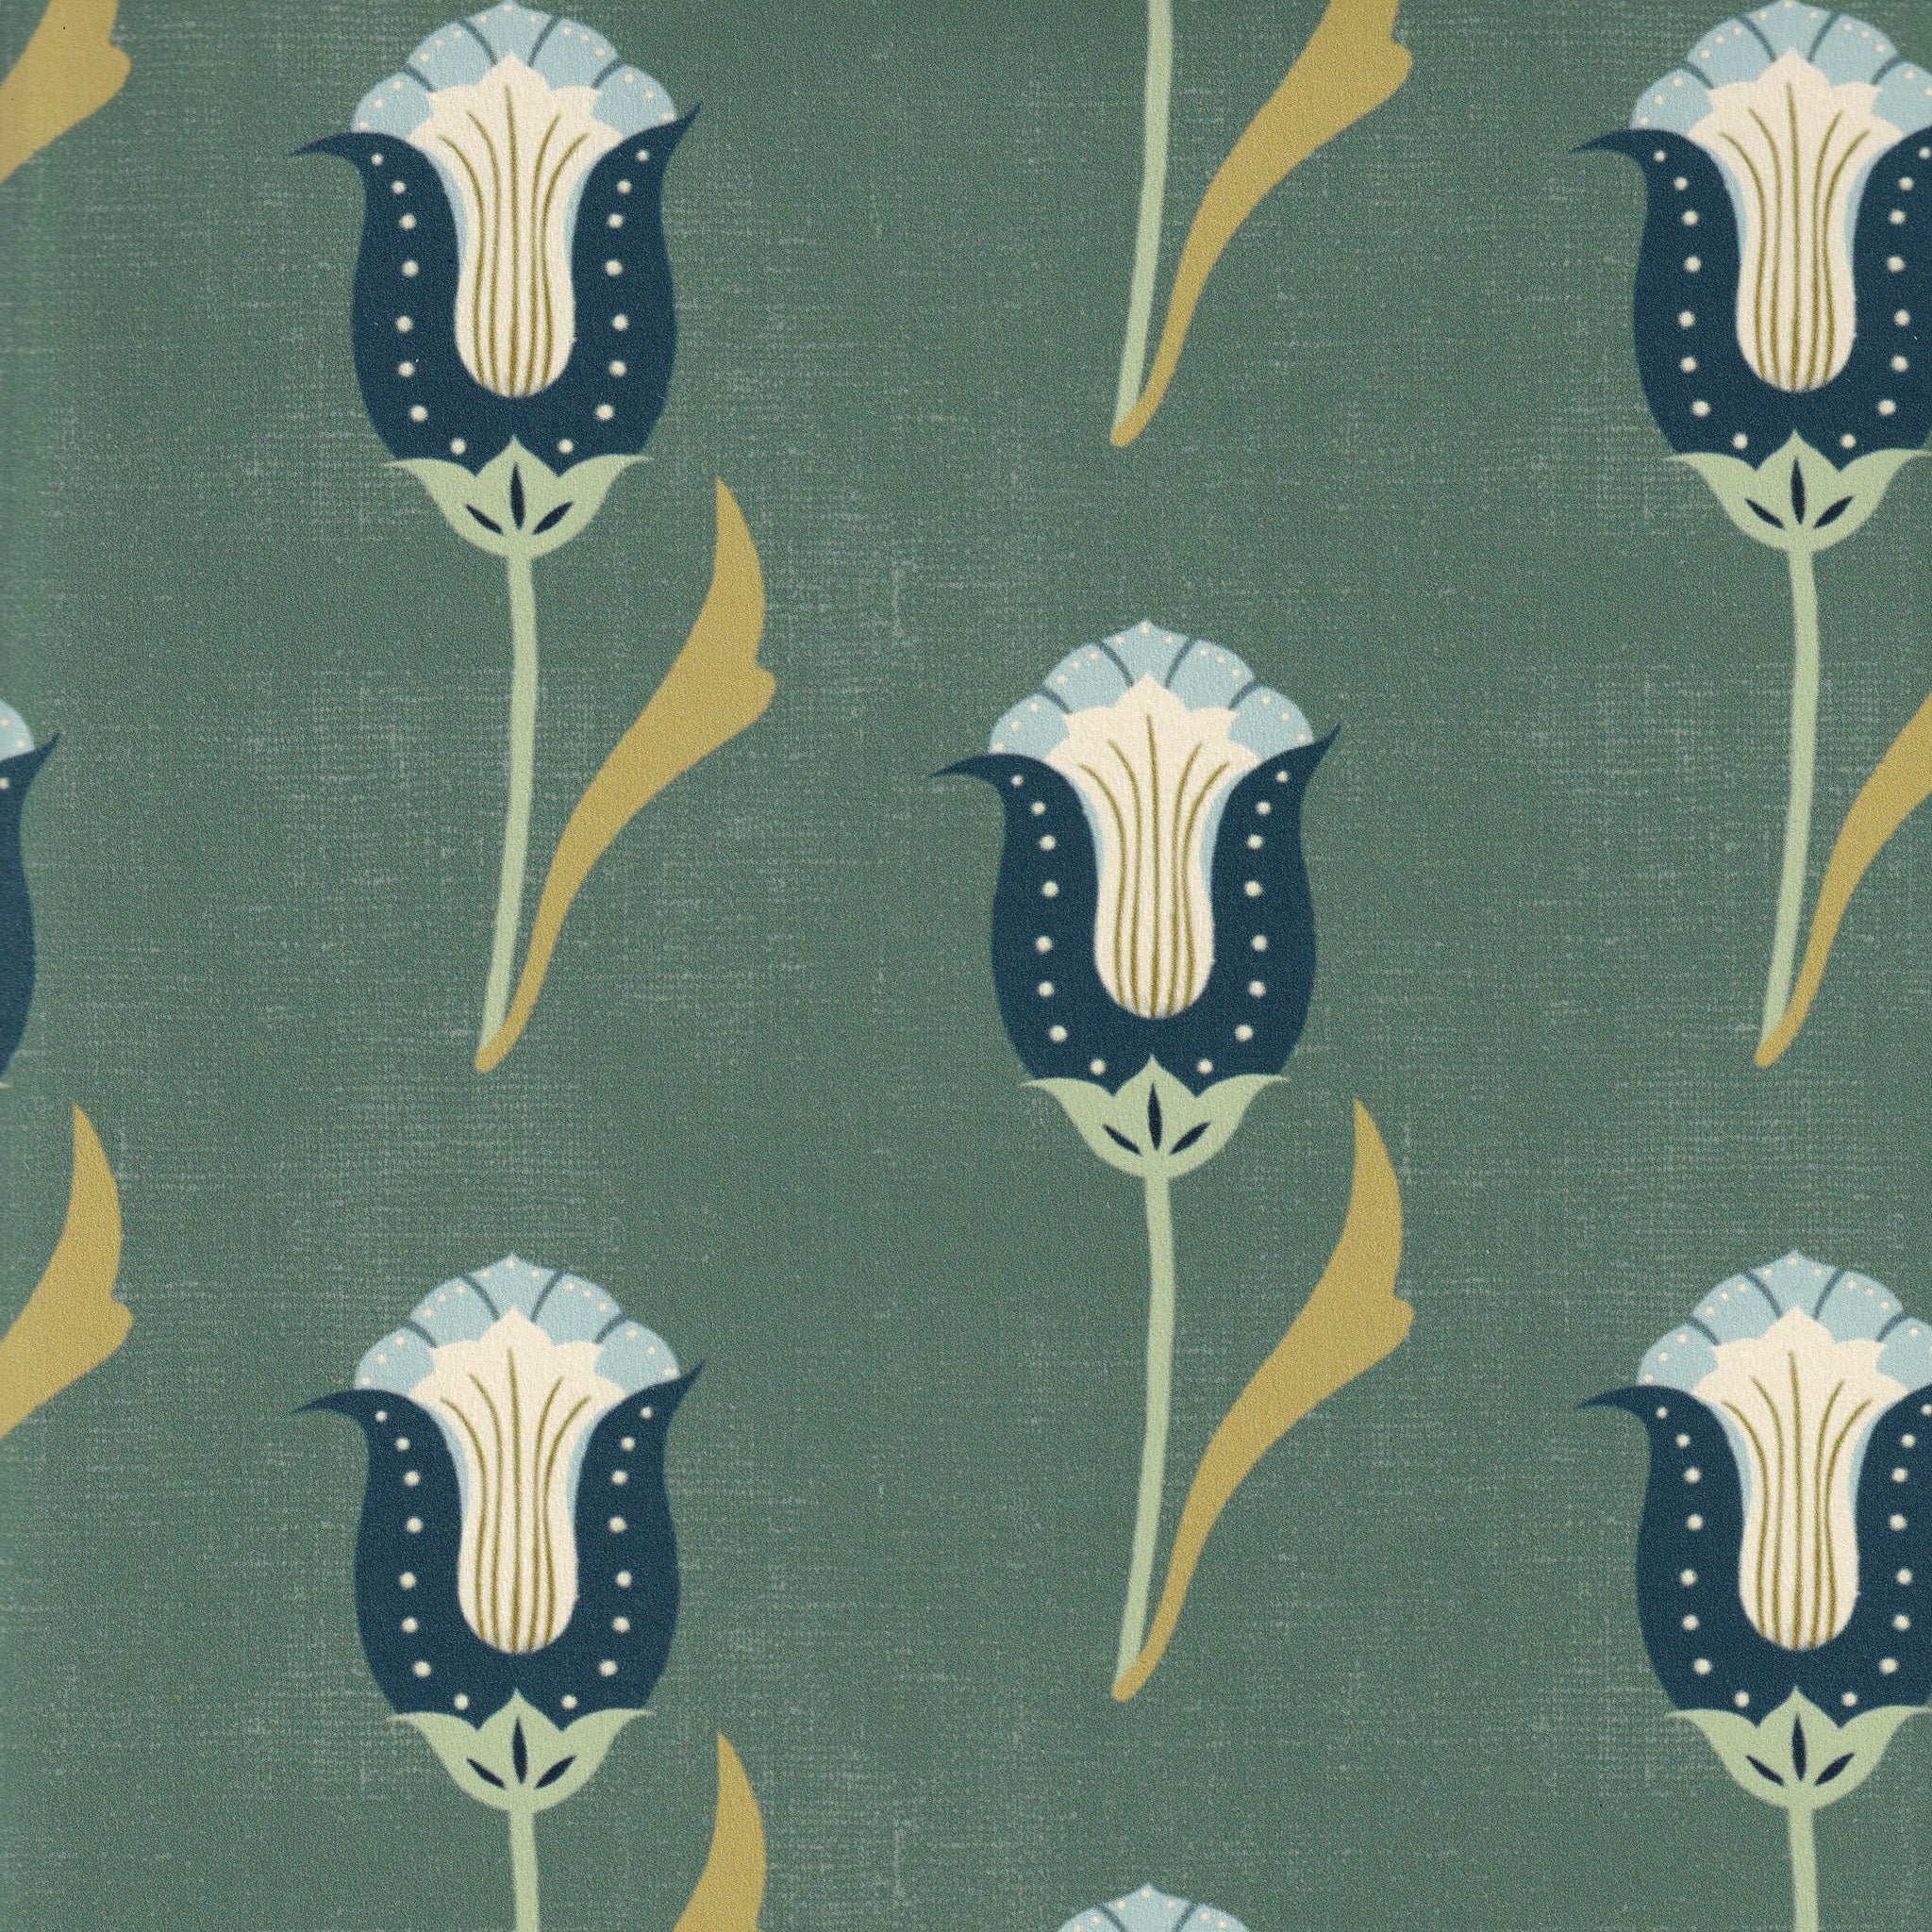 Abstract floral moss green and teal wallpaper swatch